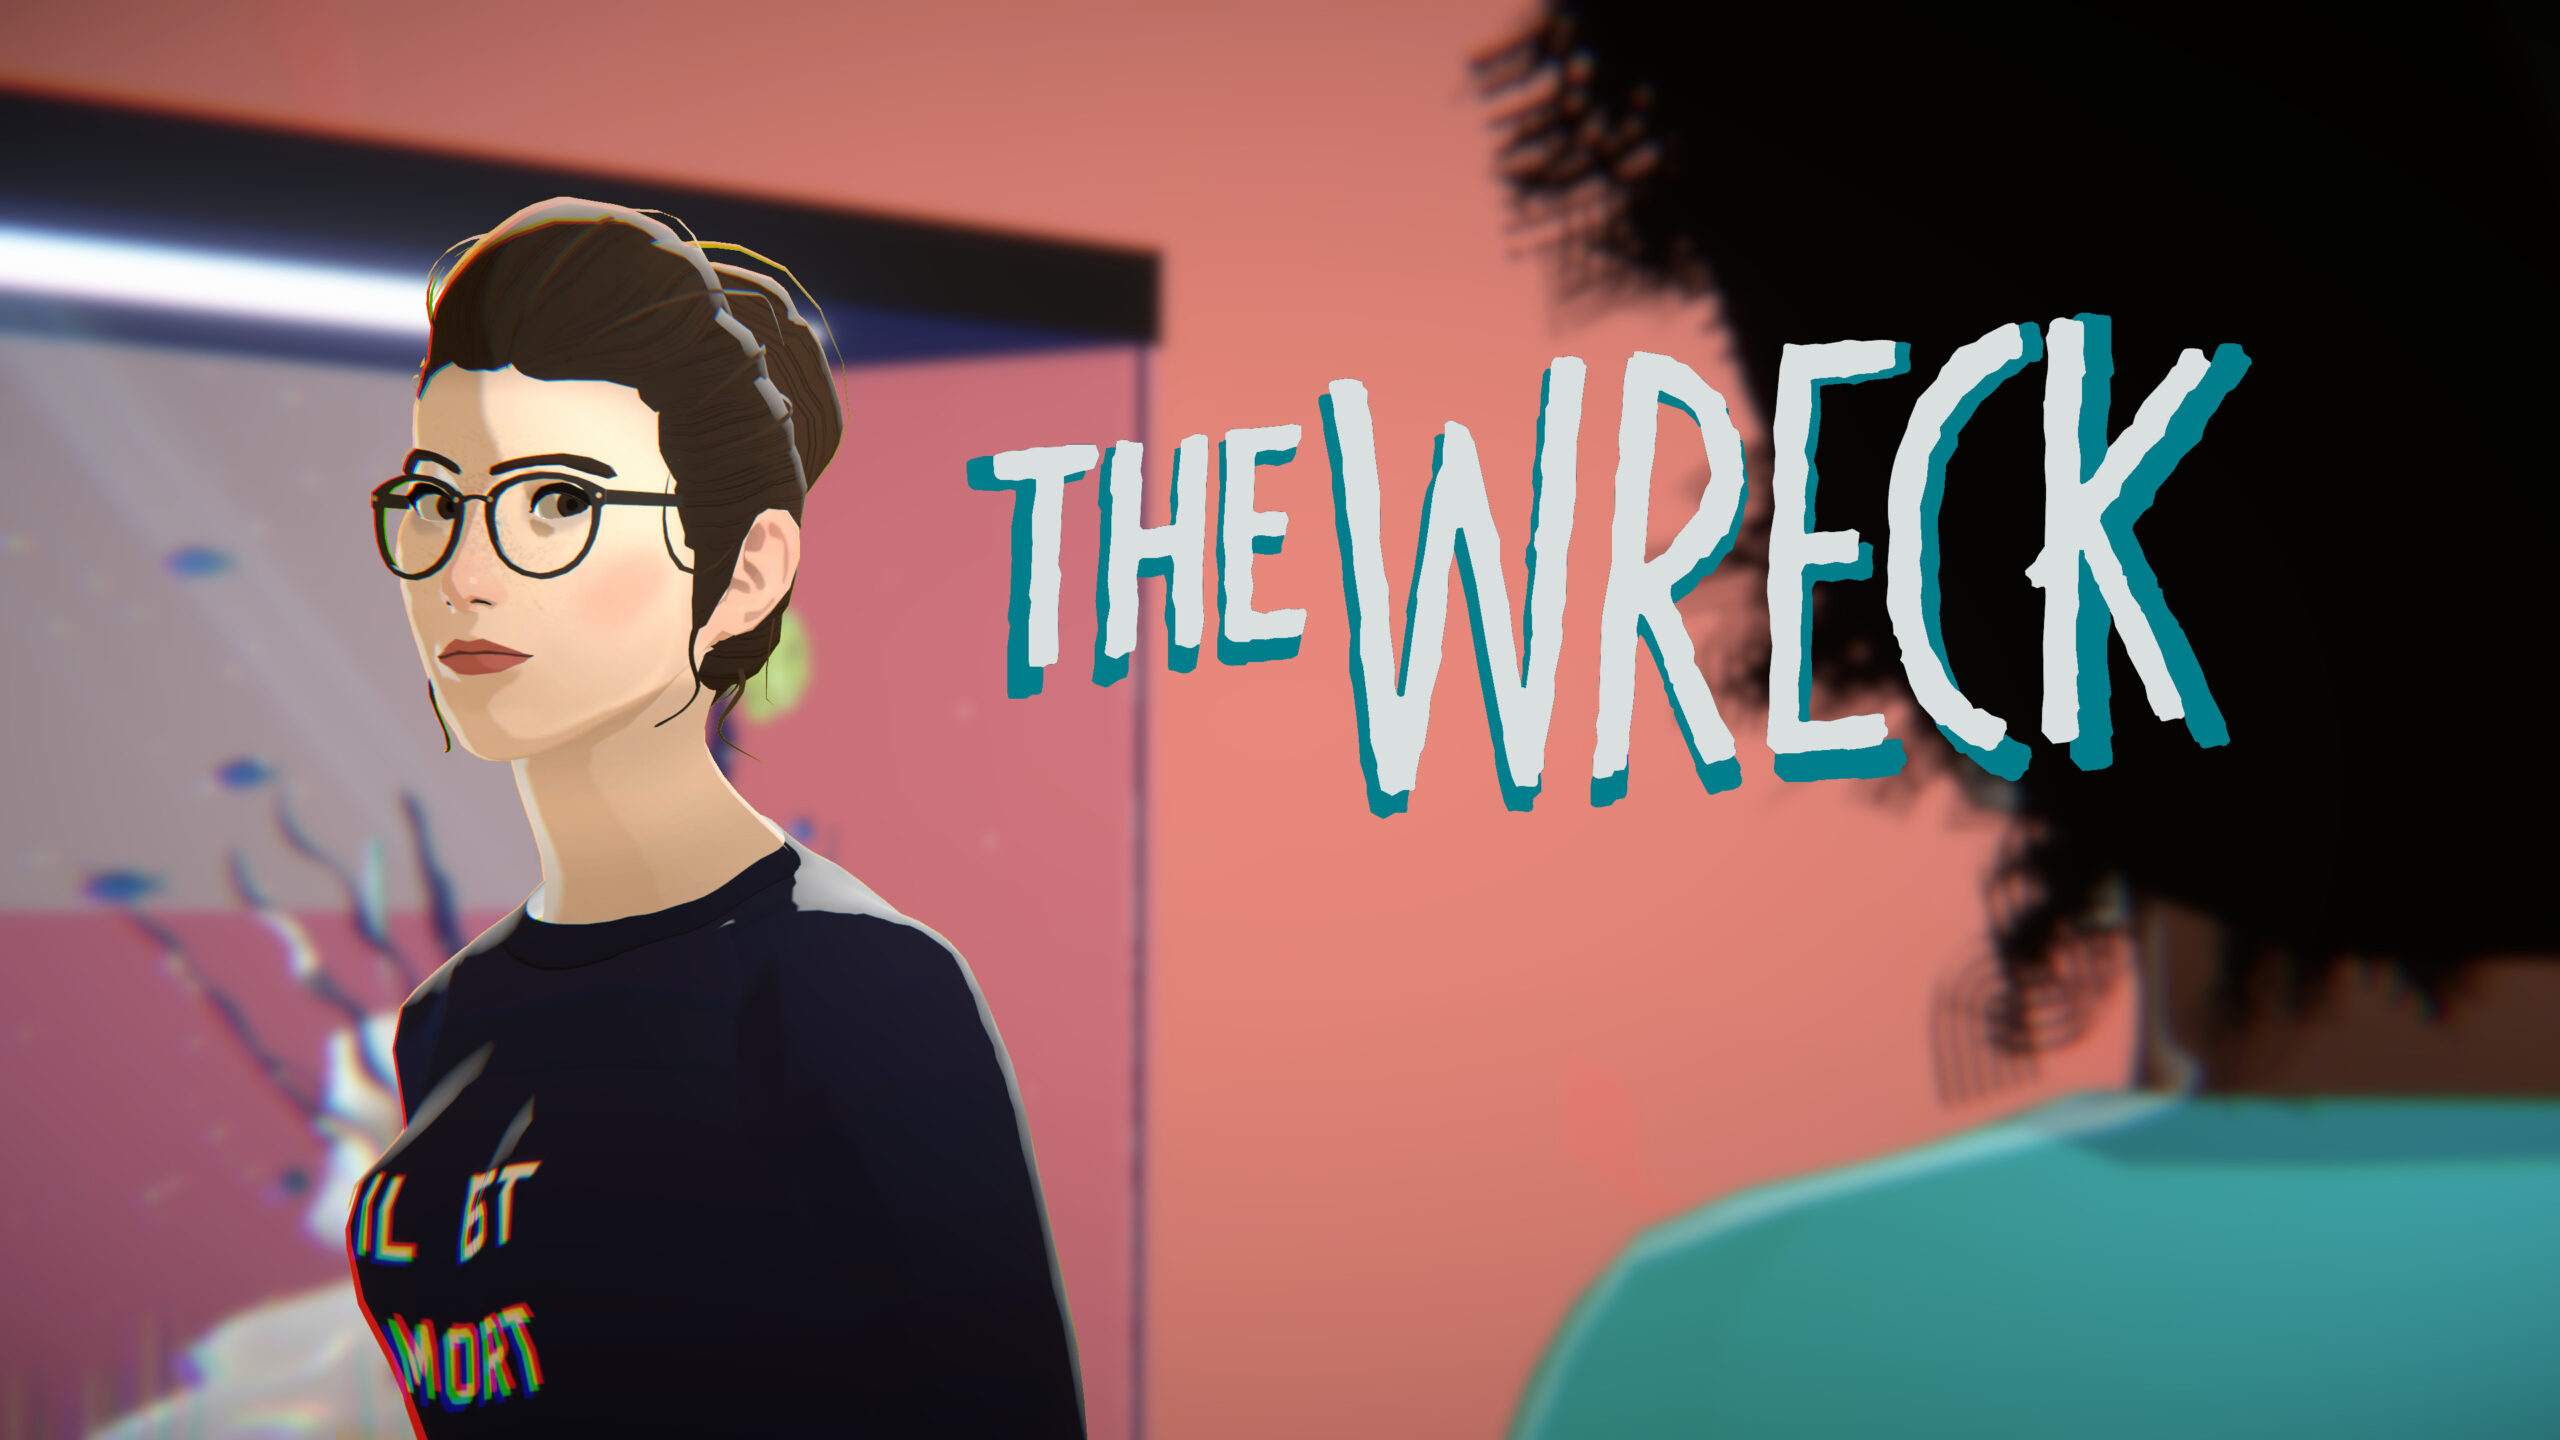 The Wreck is an Upcoming “Reality-Inspired Game”... What Does That Mean?